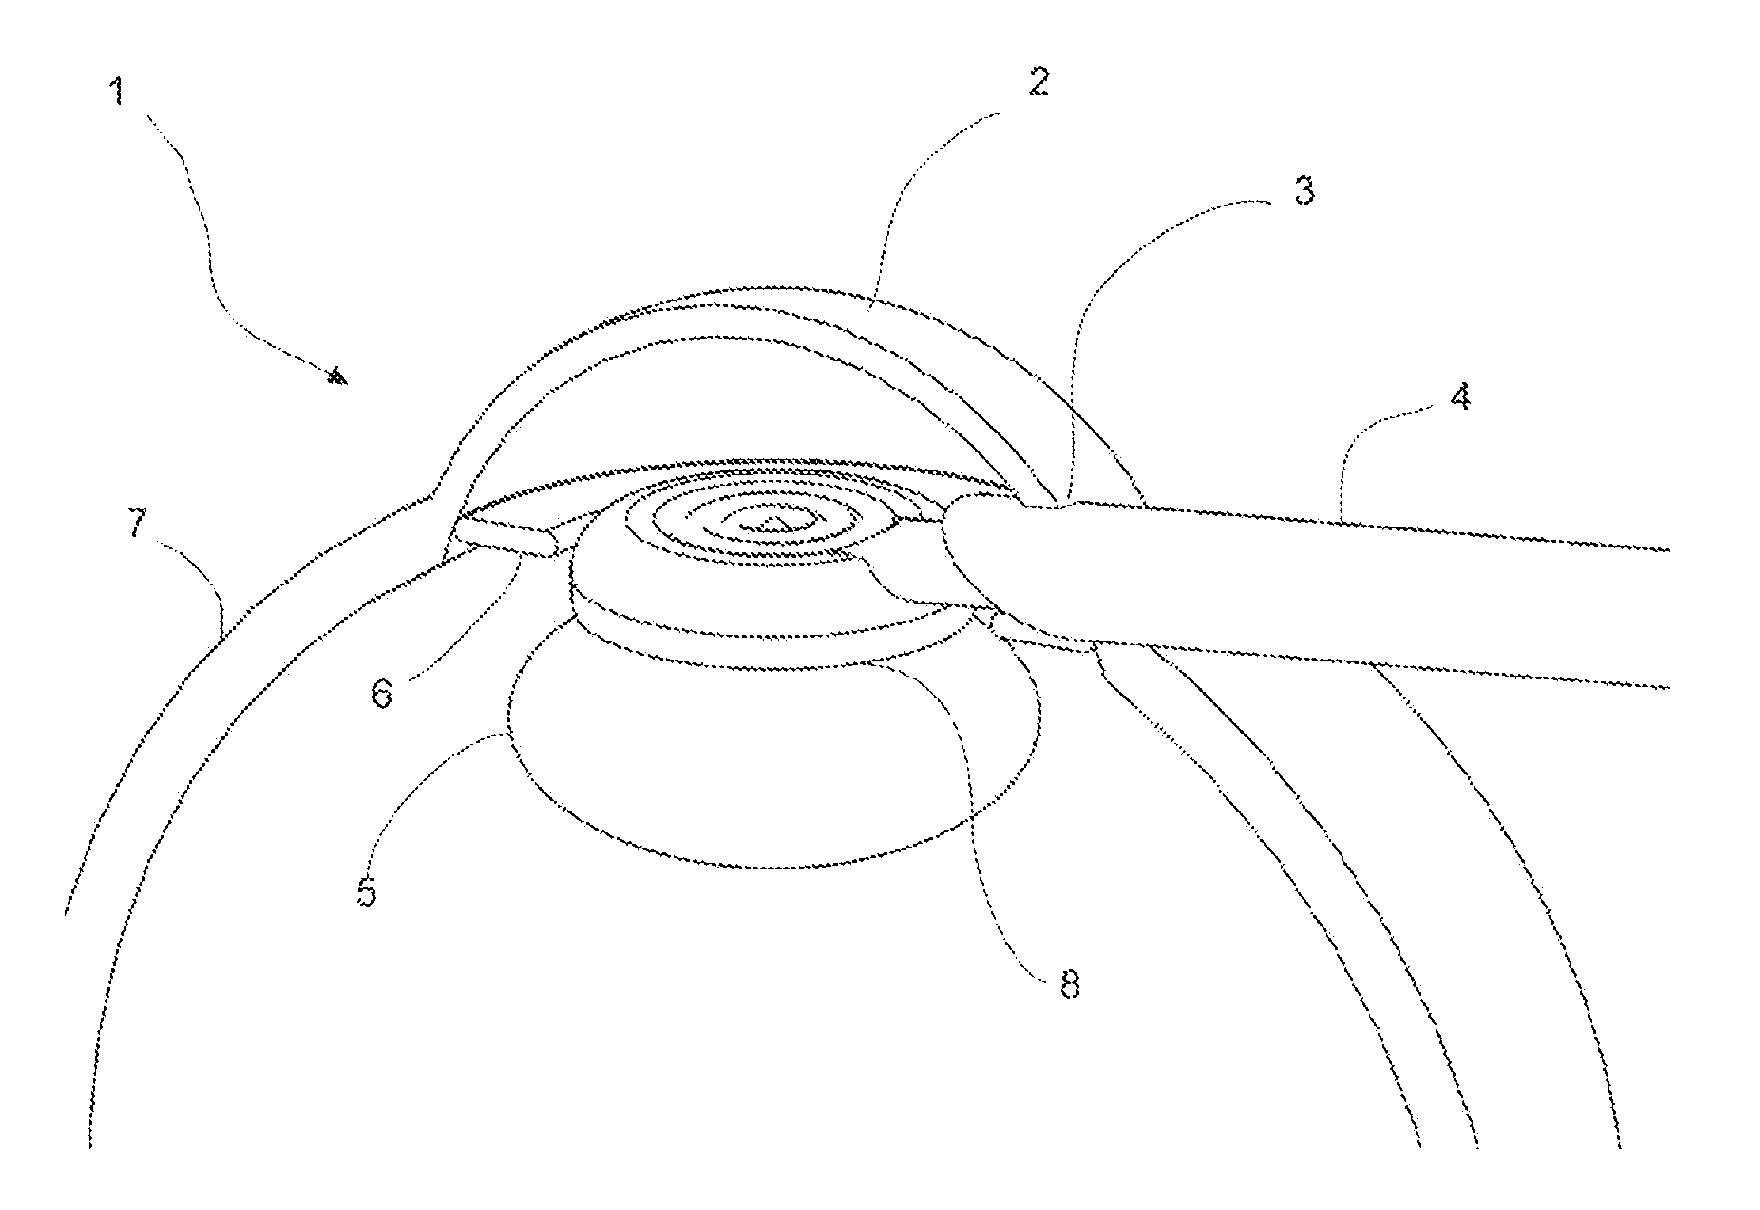 Ophthalmic surgical device for capsulotomy